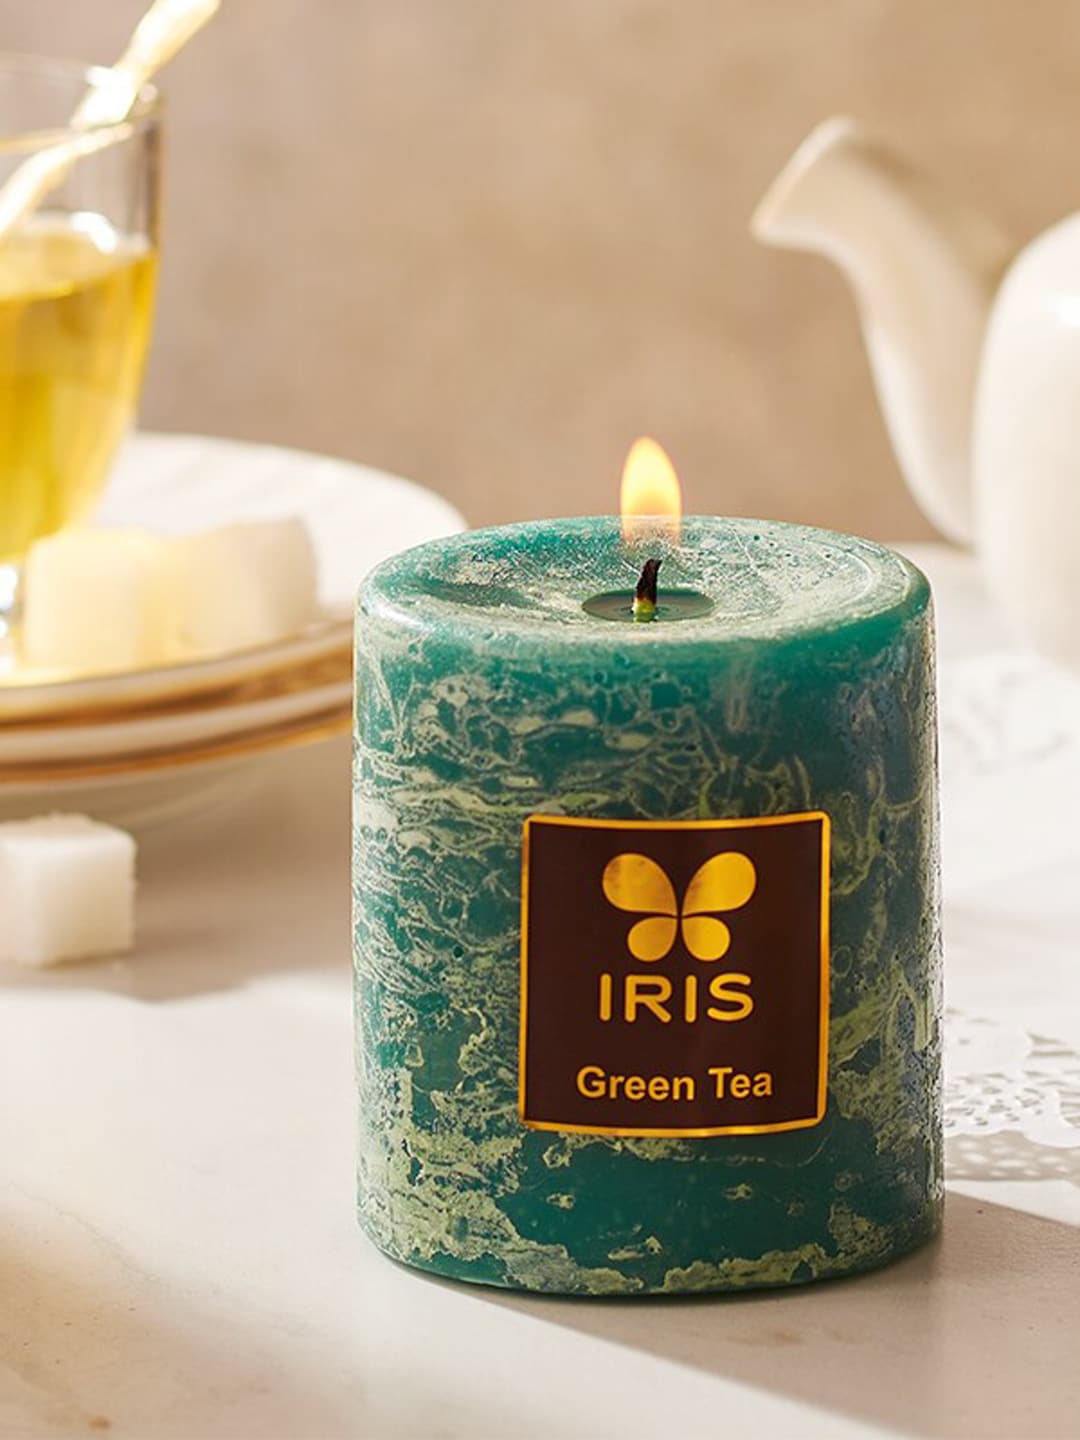 Iris Green Tea Scented Candle Price in India